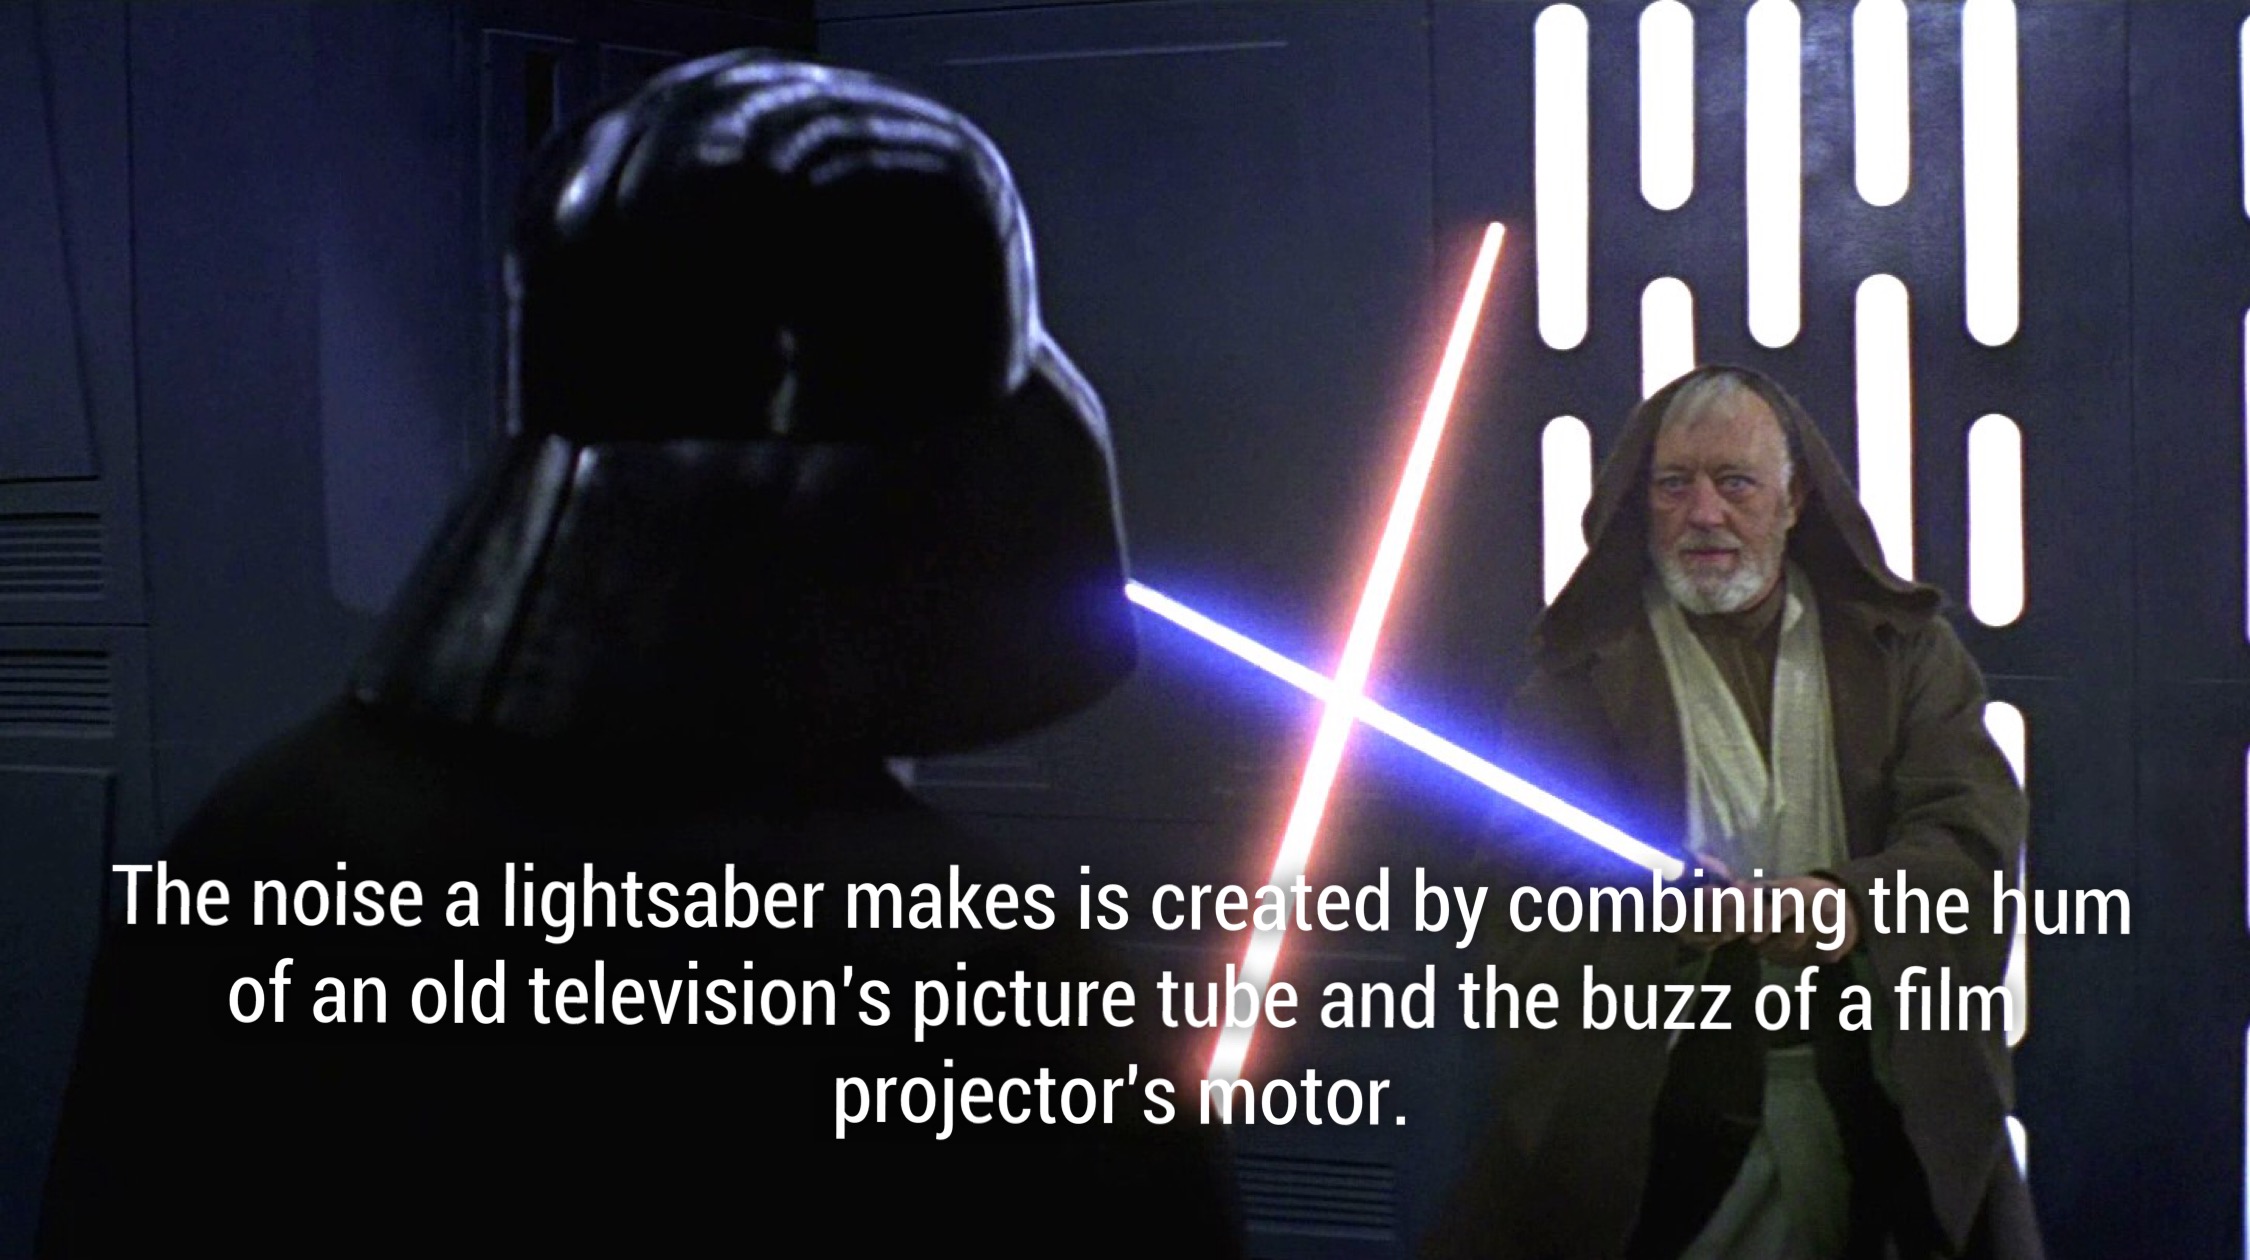 darth vader vs obi wan - The noise a lightsaber makes is created by combining the hum of an old television's picture tube and the buzz of a film projector's motor.